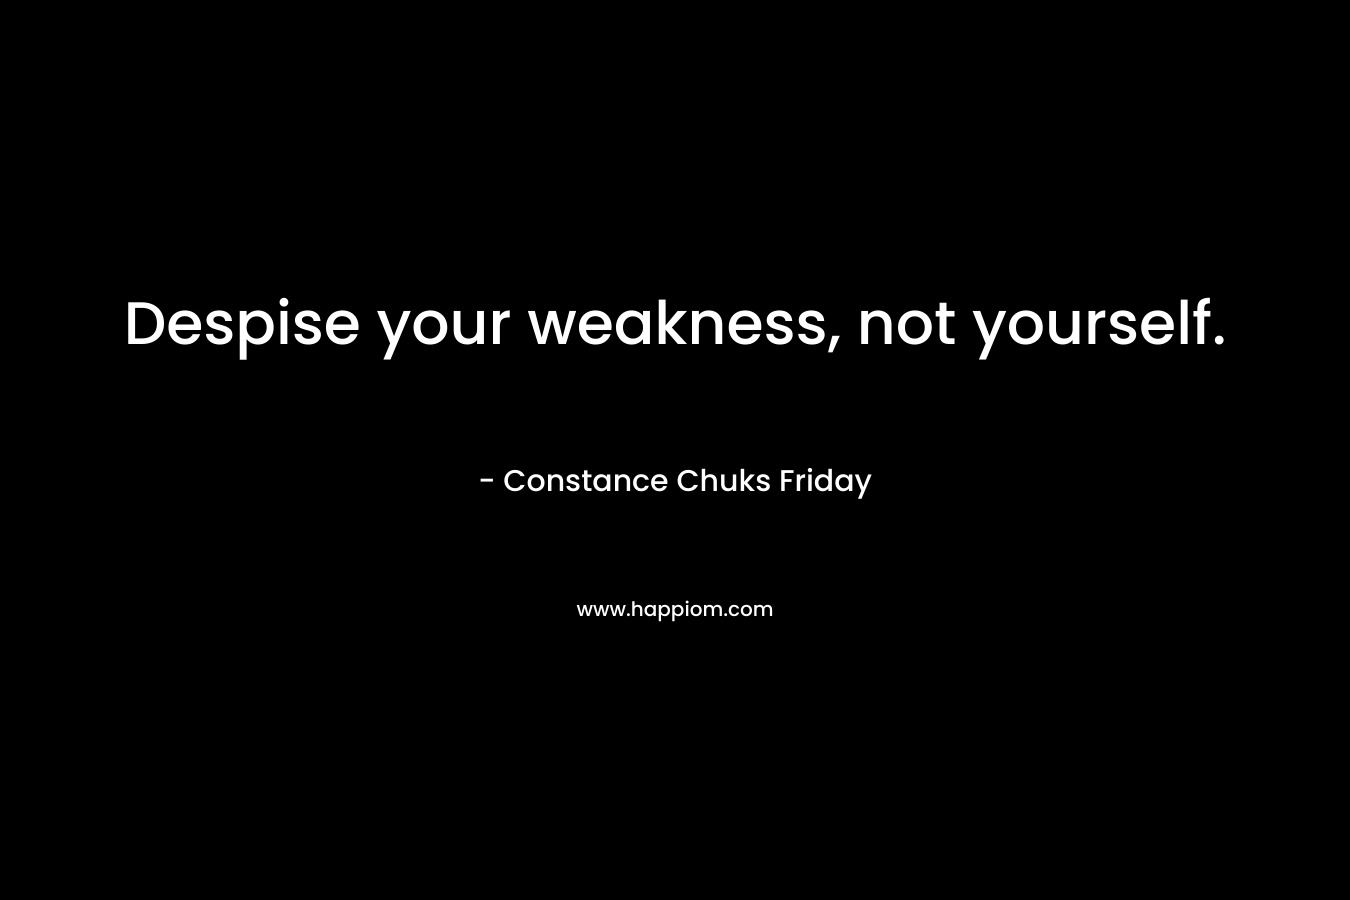 Despise your weakness, not yourself.